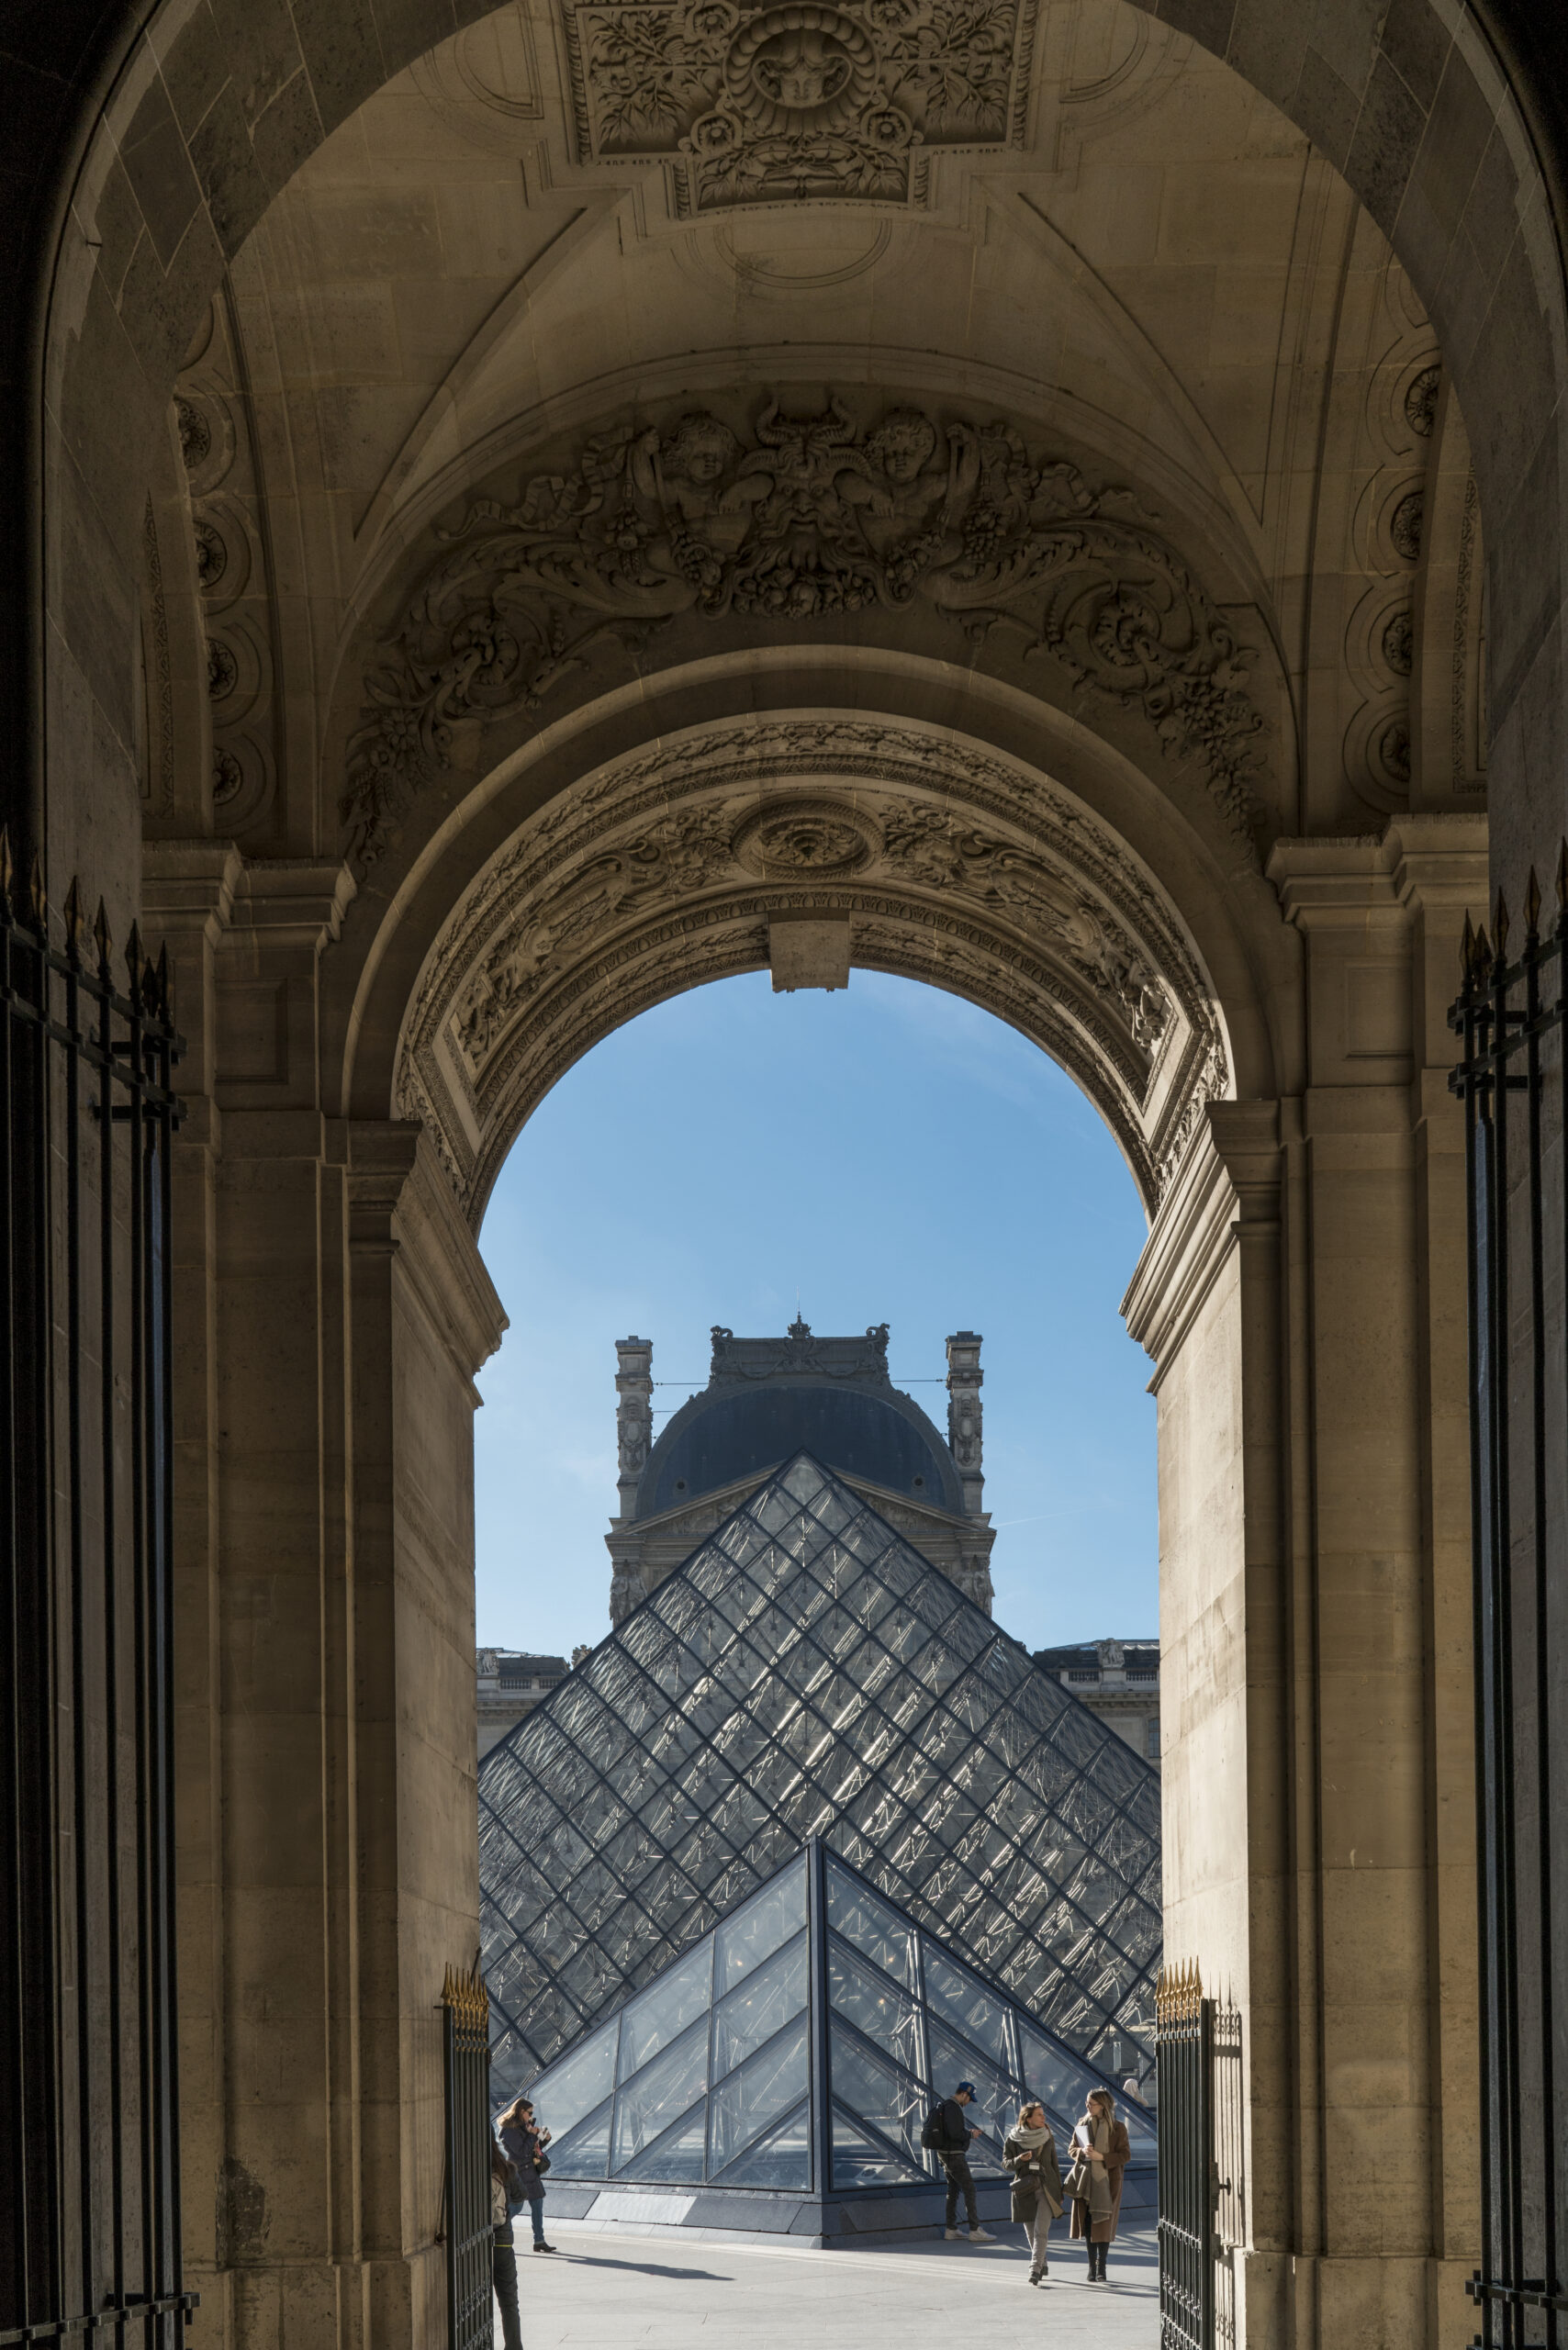 A view of the Louvre from inside an archway.